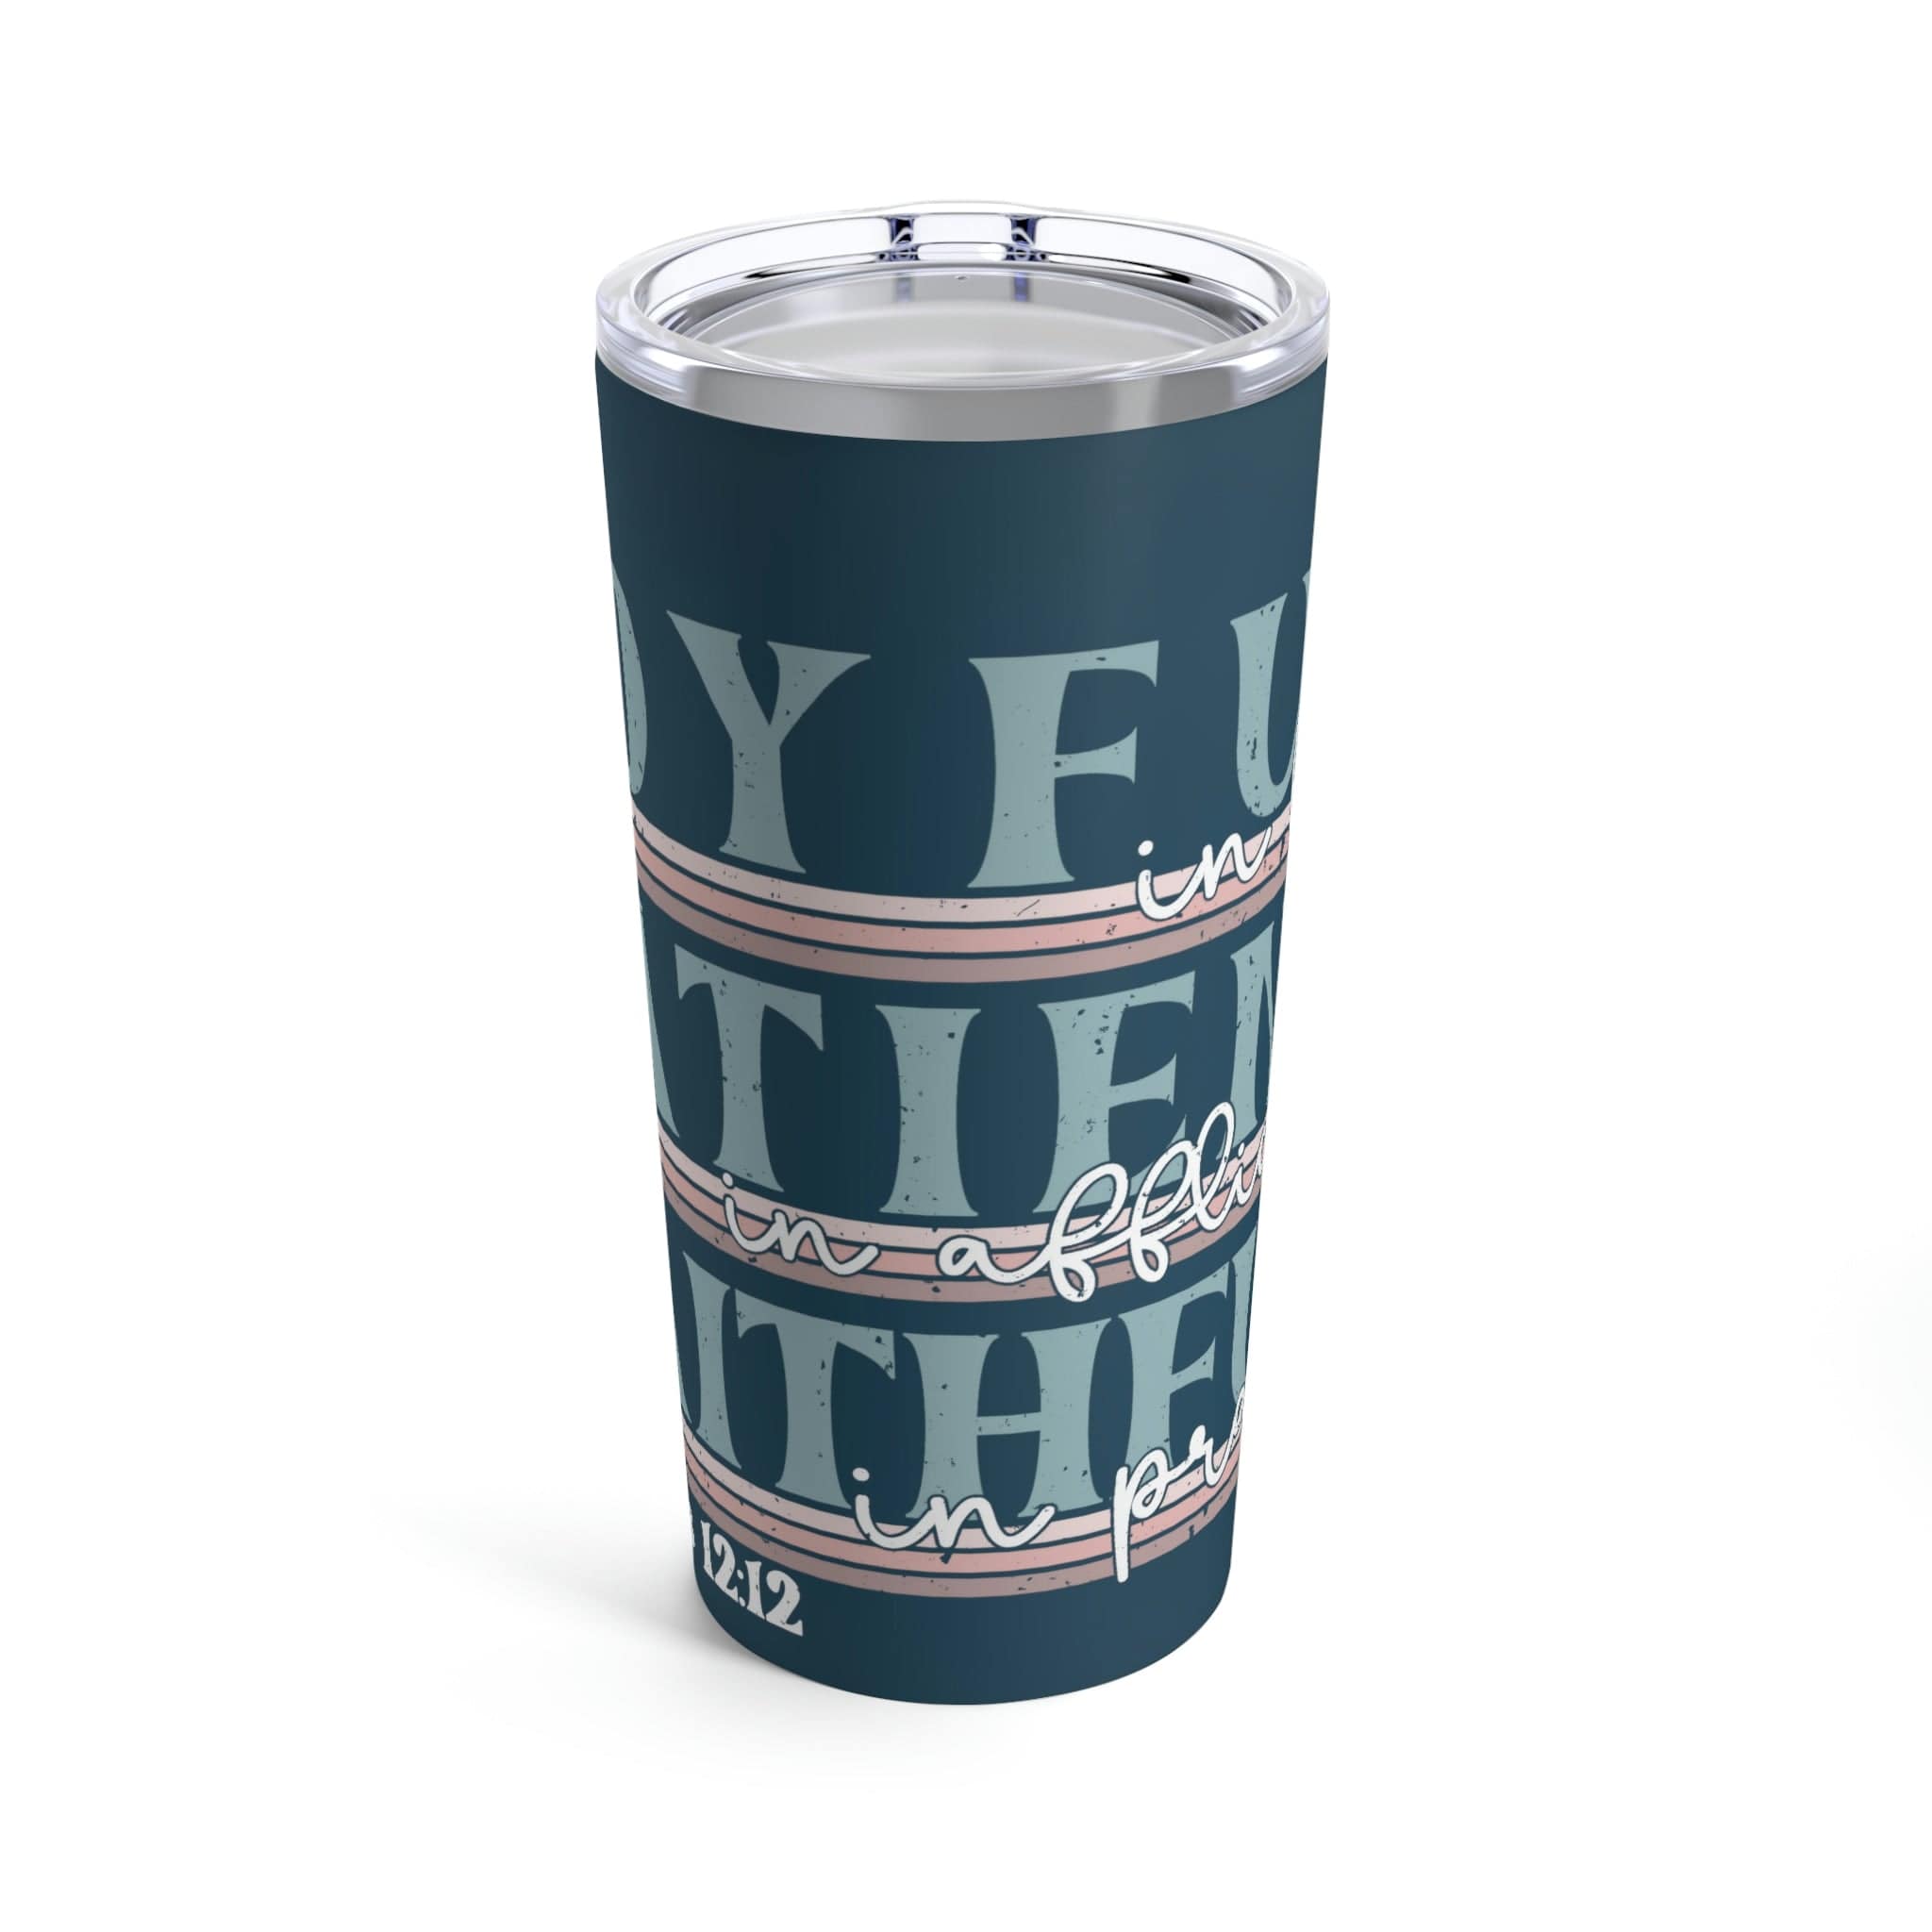 Romans 12:12 20 oz insulated tumbler with lid and straw